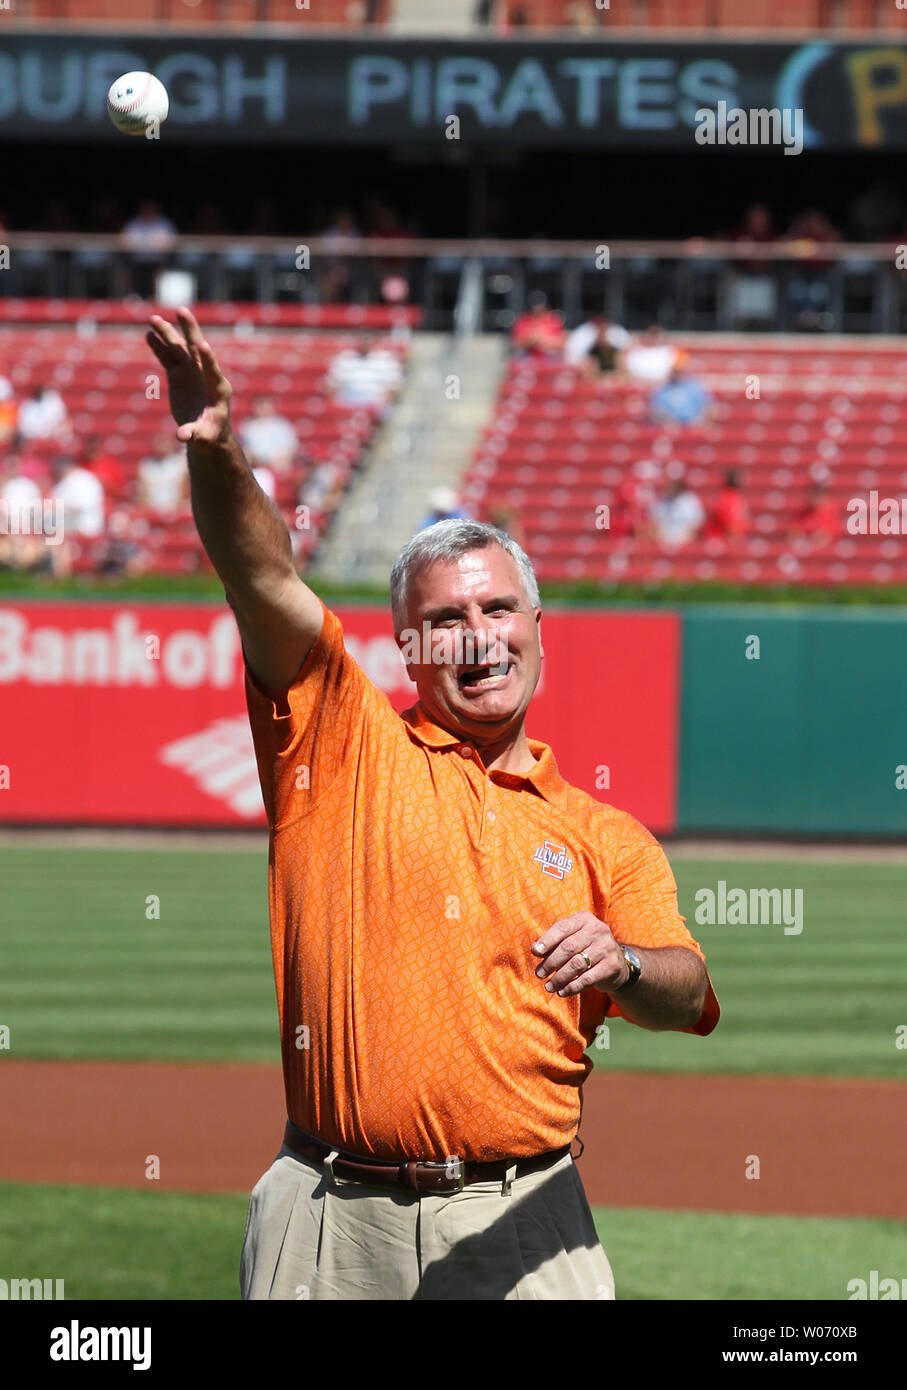 University of Illinois' head basketball coach Bruce Weber throws a ceremonial first pitch before the Pittsburgh Pirates-St. Louis Cardinals baseball game at Busch Stadium in St. Louis on August 27, 2011.  UPI/Bill Greenblatt Stock Photo